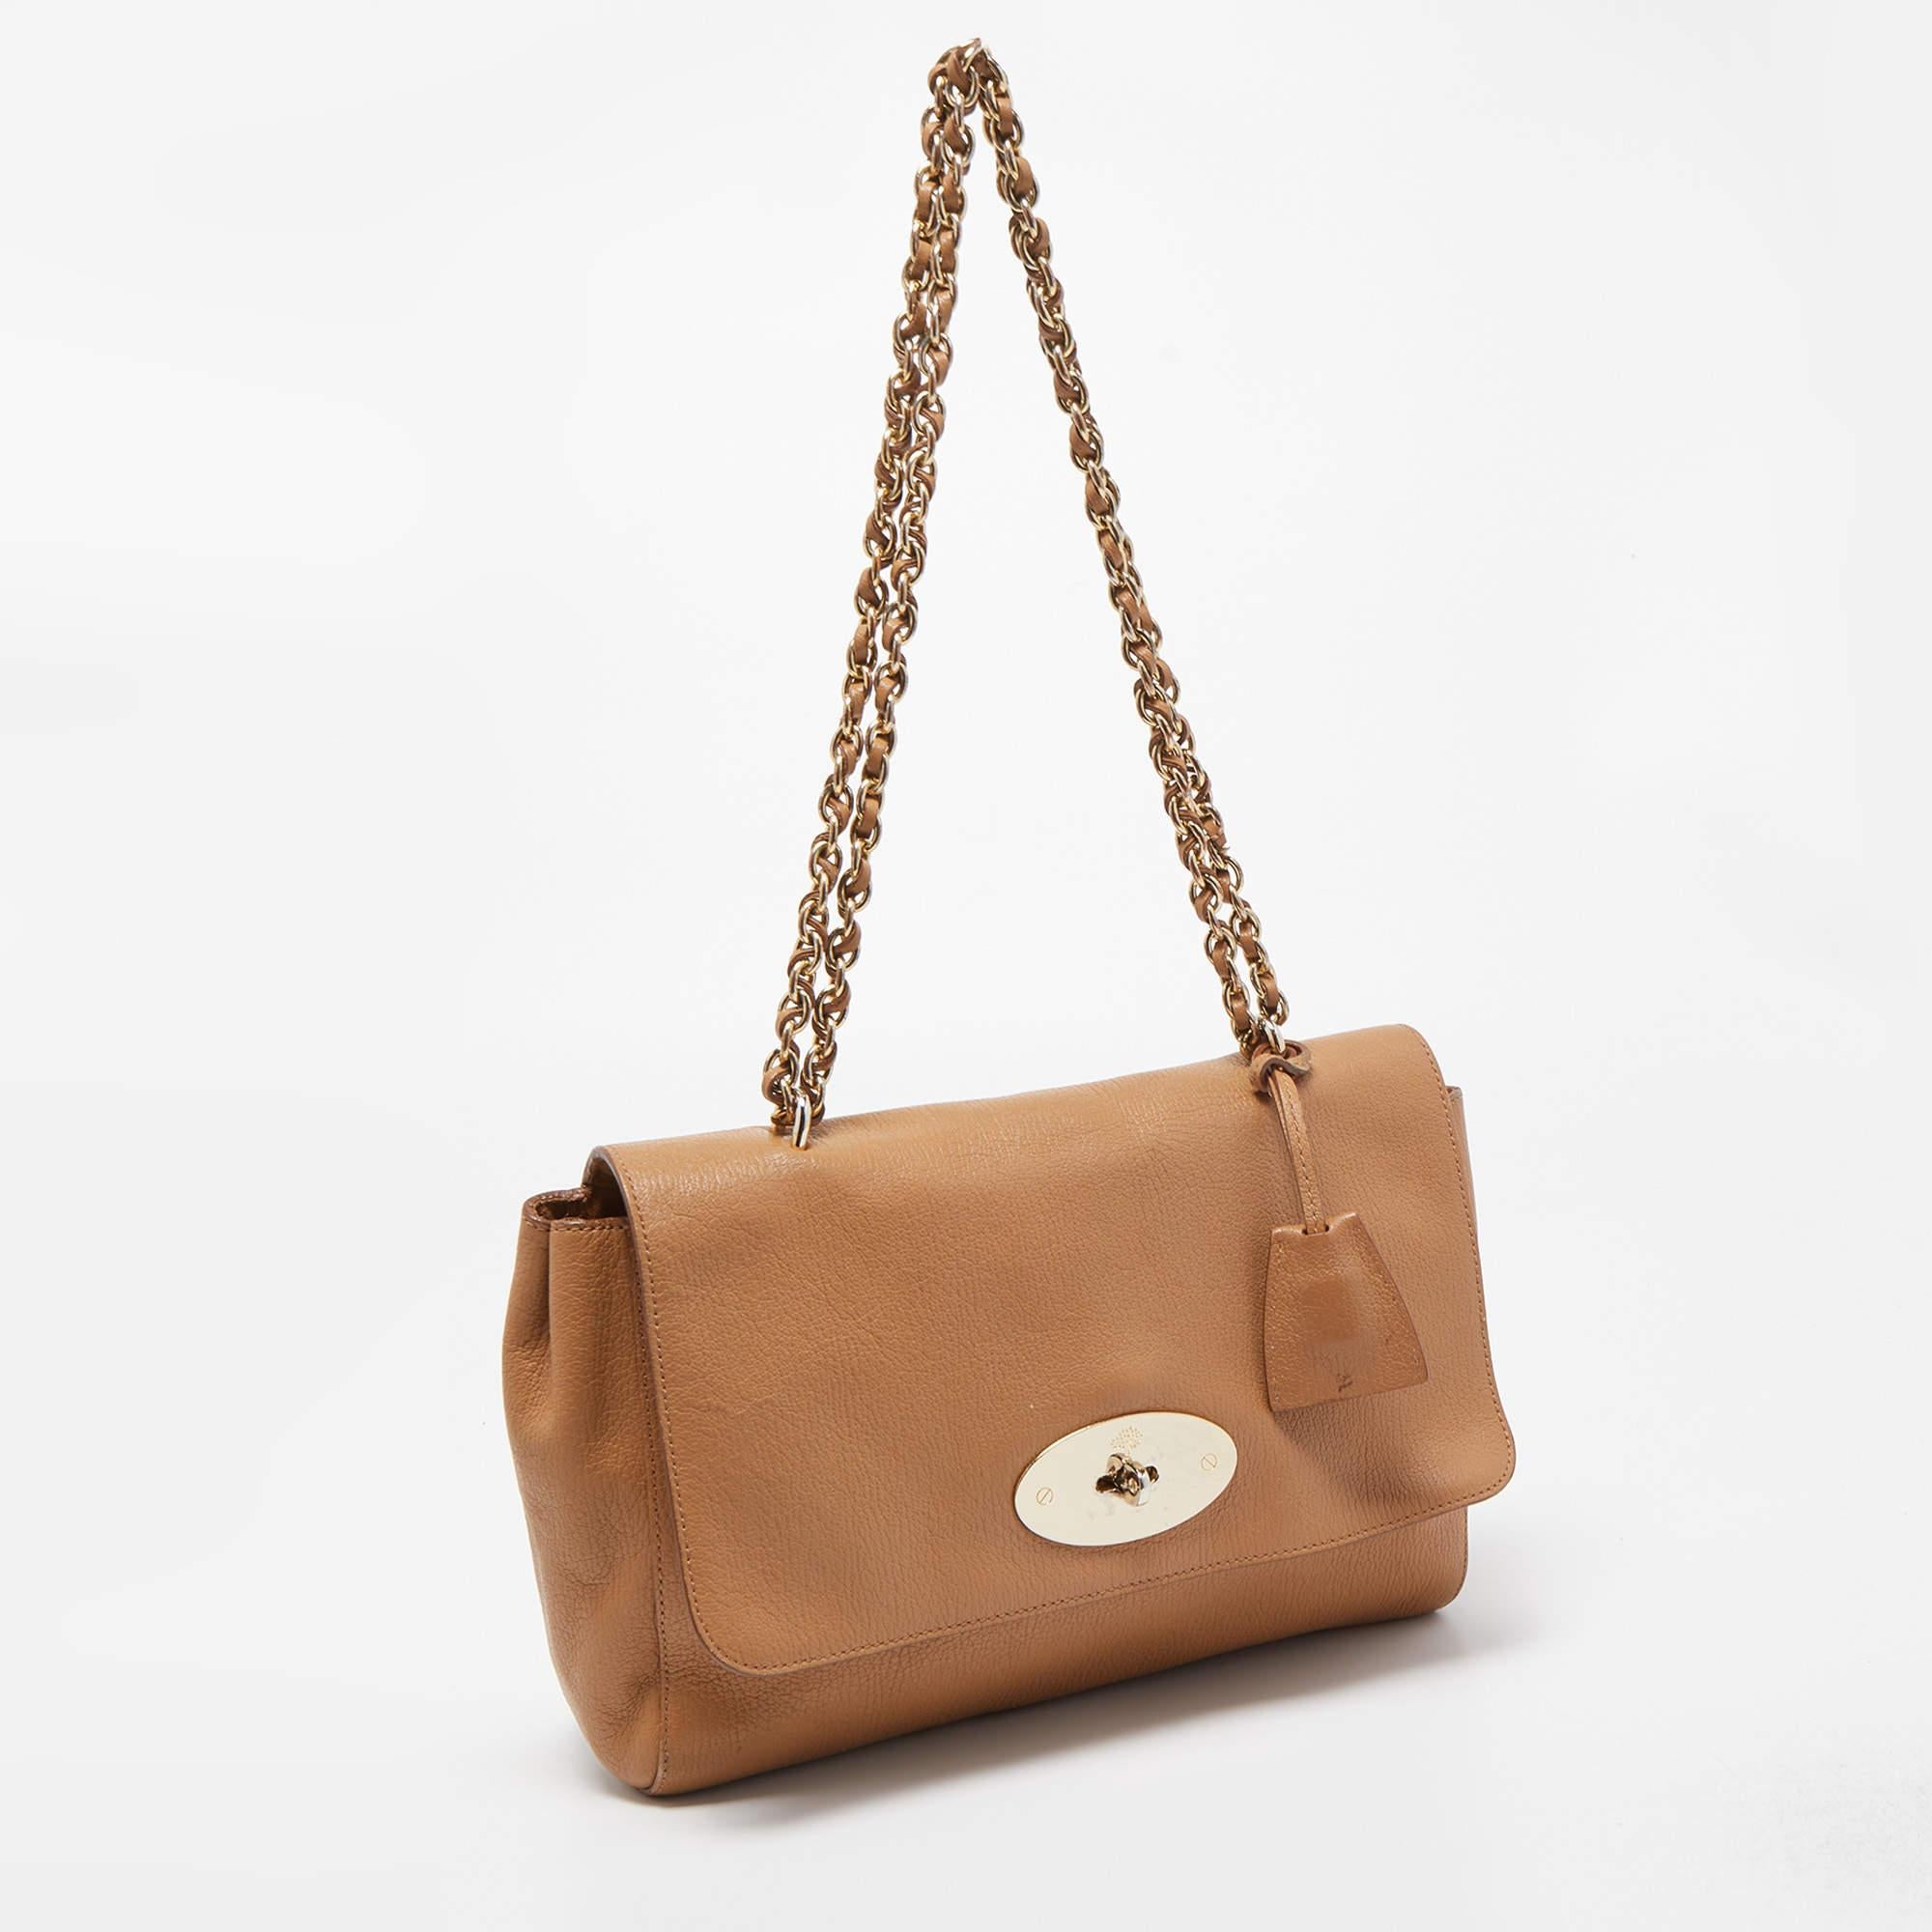 Women's Mulberry Tan Leather Medium Lily Shoulder Bag